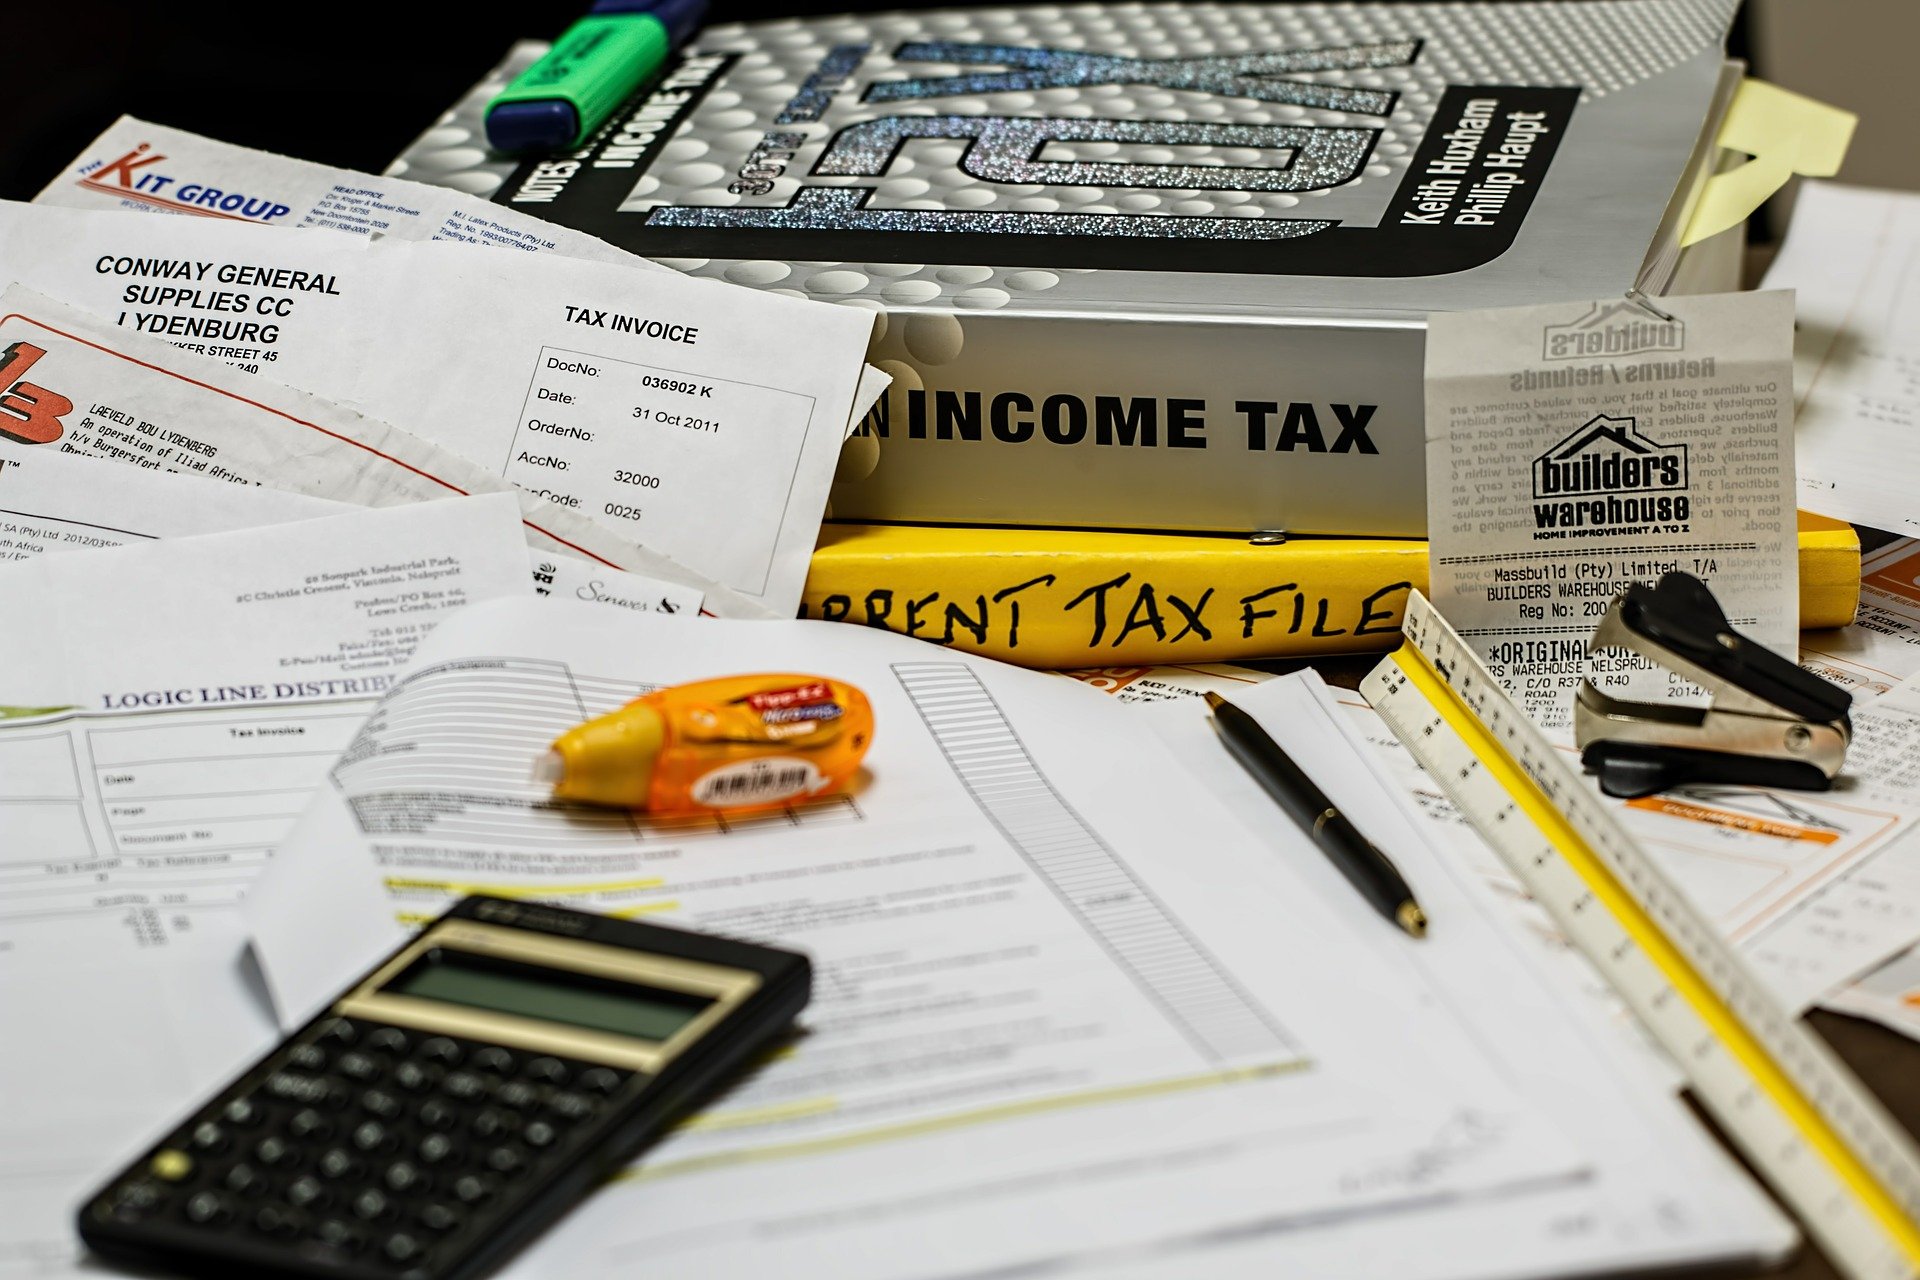 2020 Tax Changes: How Tax Law Changes May Impact You for Fiscal Year 2020